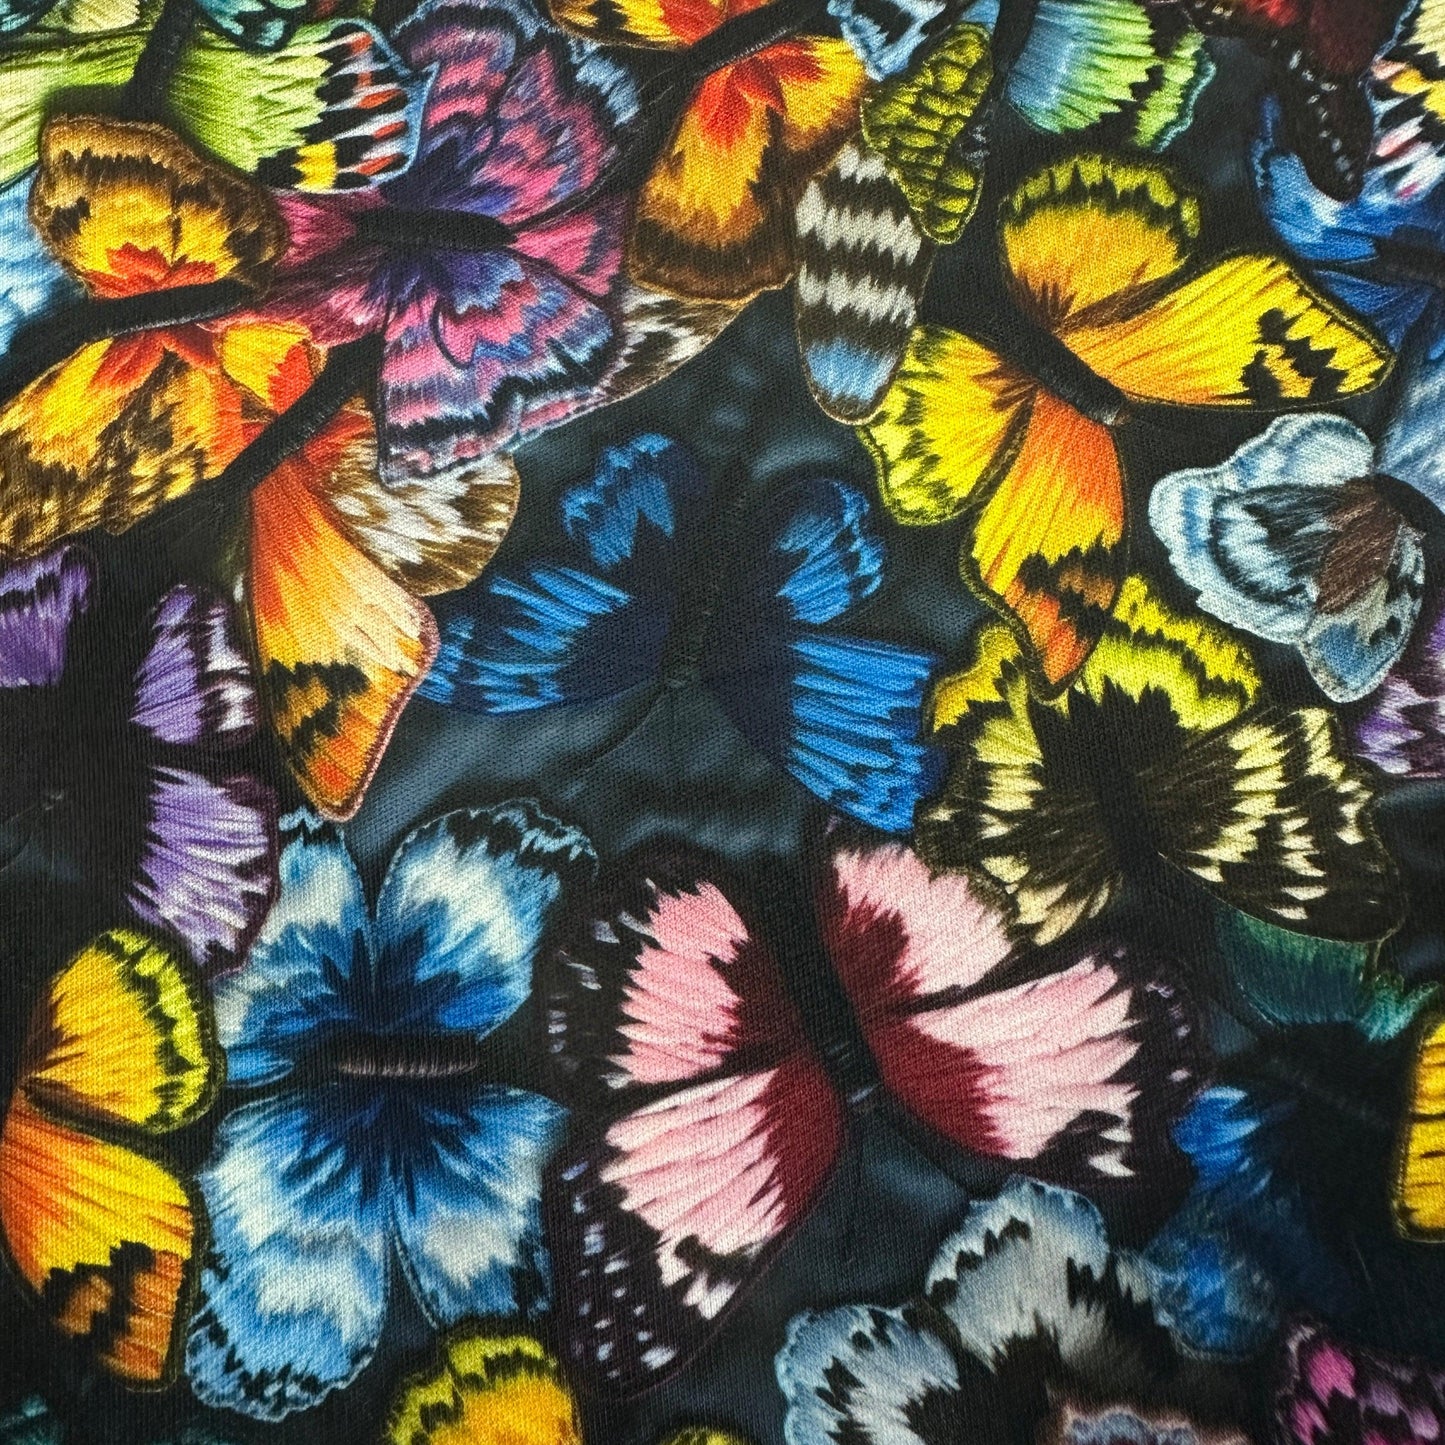 Butterfly Patches 1 mil PUL Fabric - Made in the USA - Nature's Fabrics